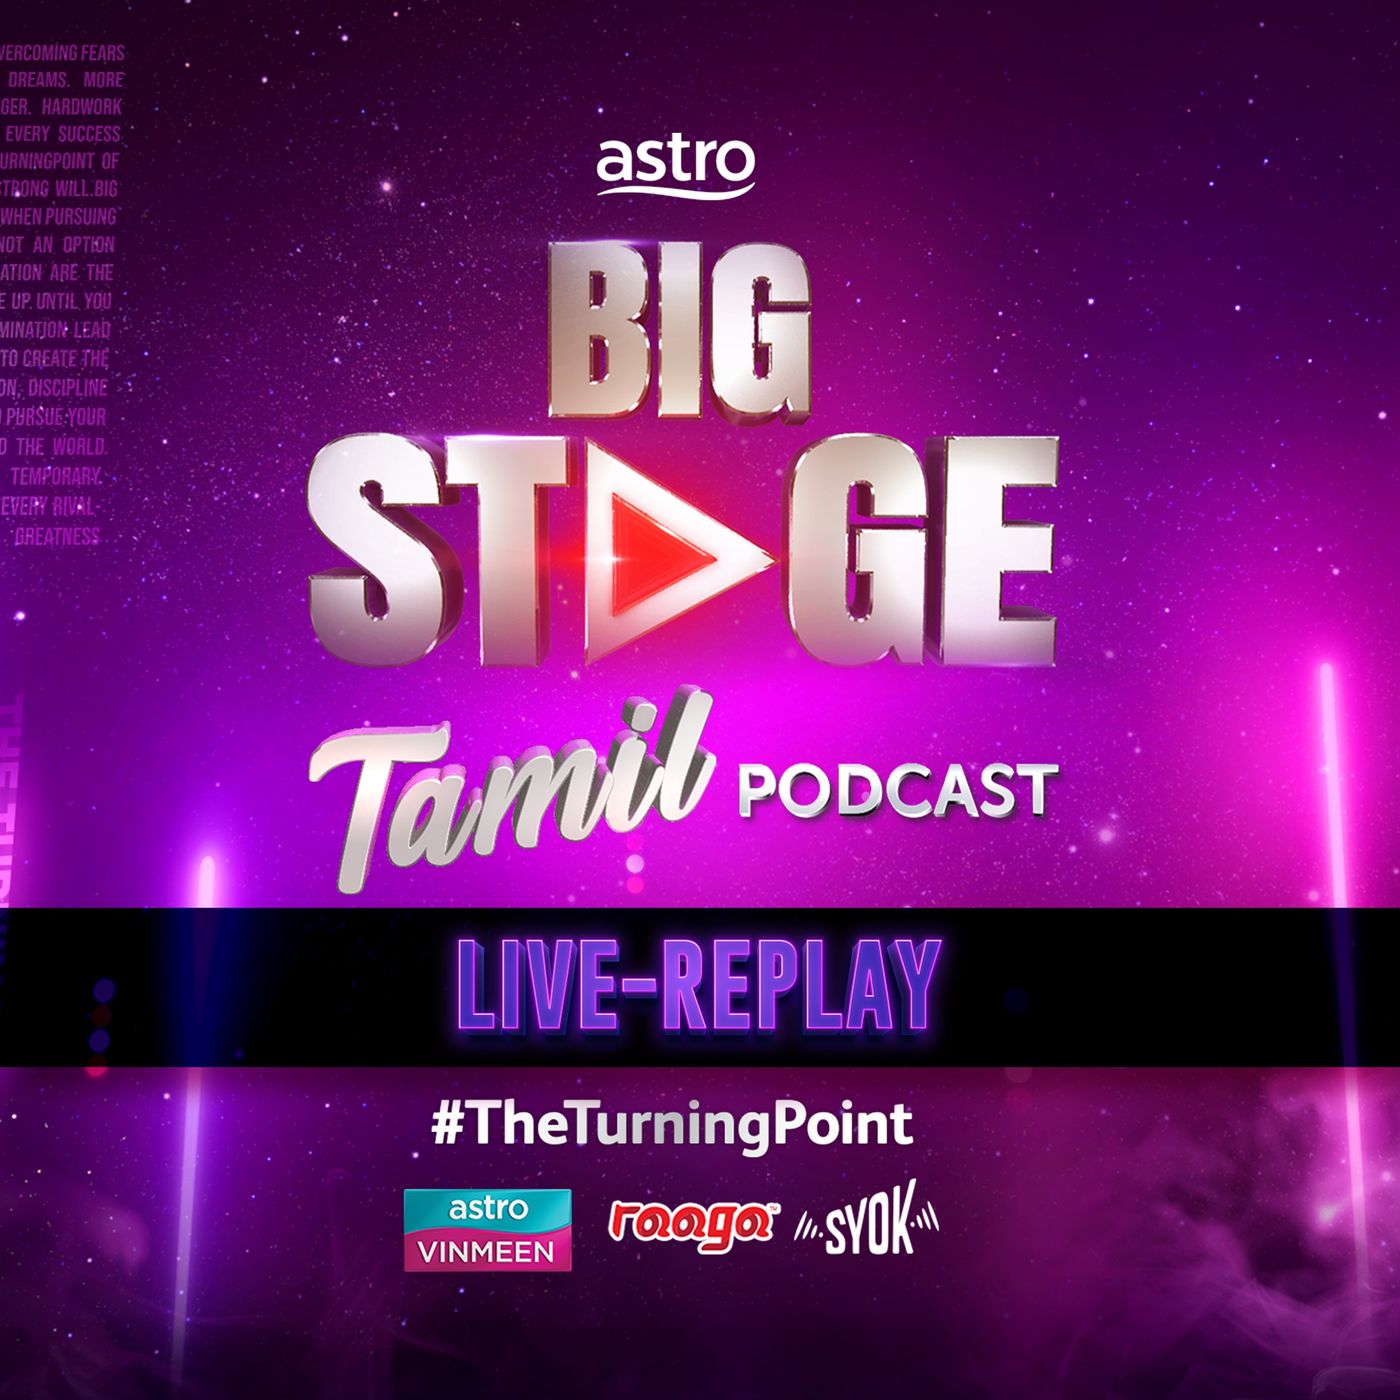 Big Stage Tamil Live Replay - SYOK Podcast [TM]